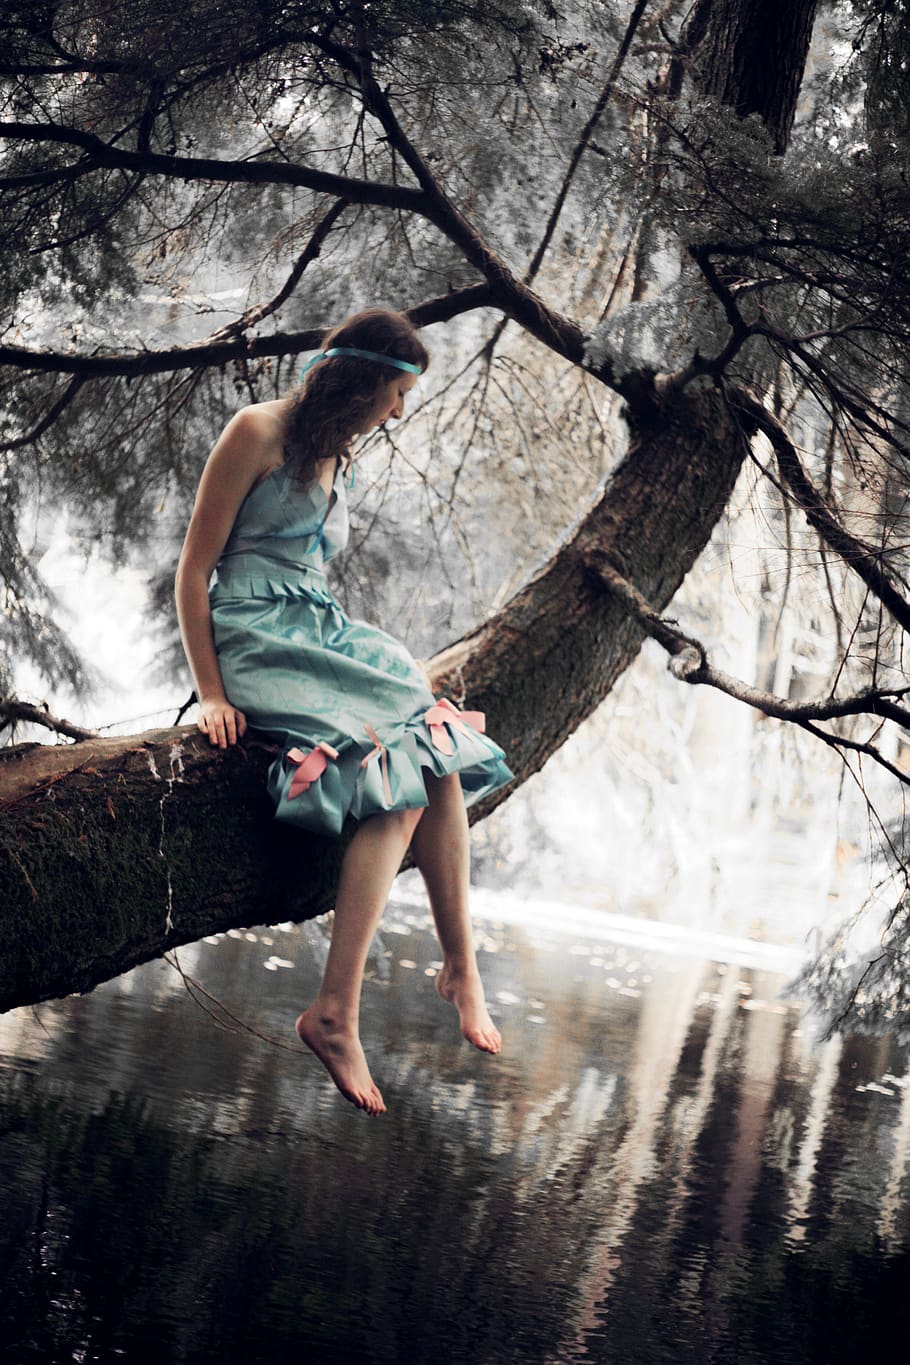 girl, 1920s, vintage, woods, forest, pond, tree, sitting, tree climbing, dress